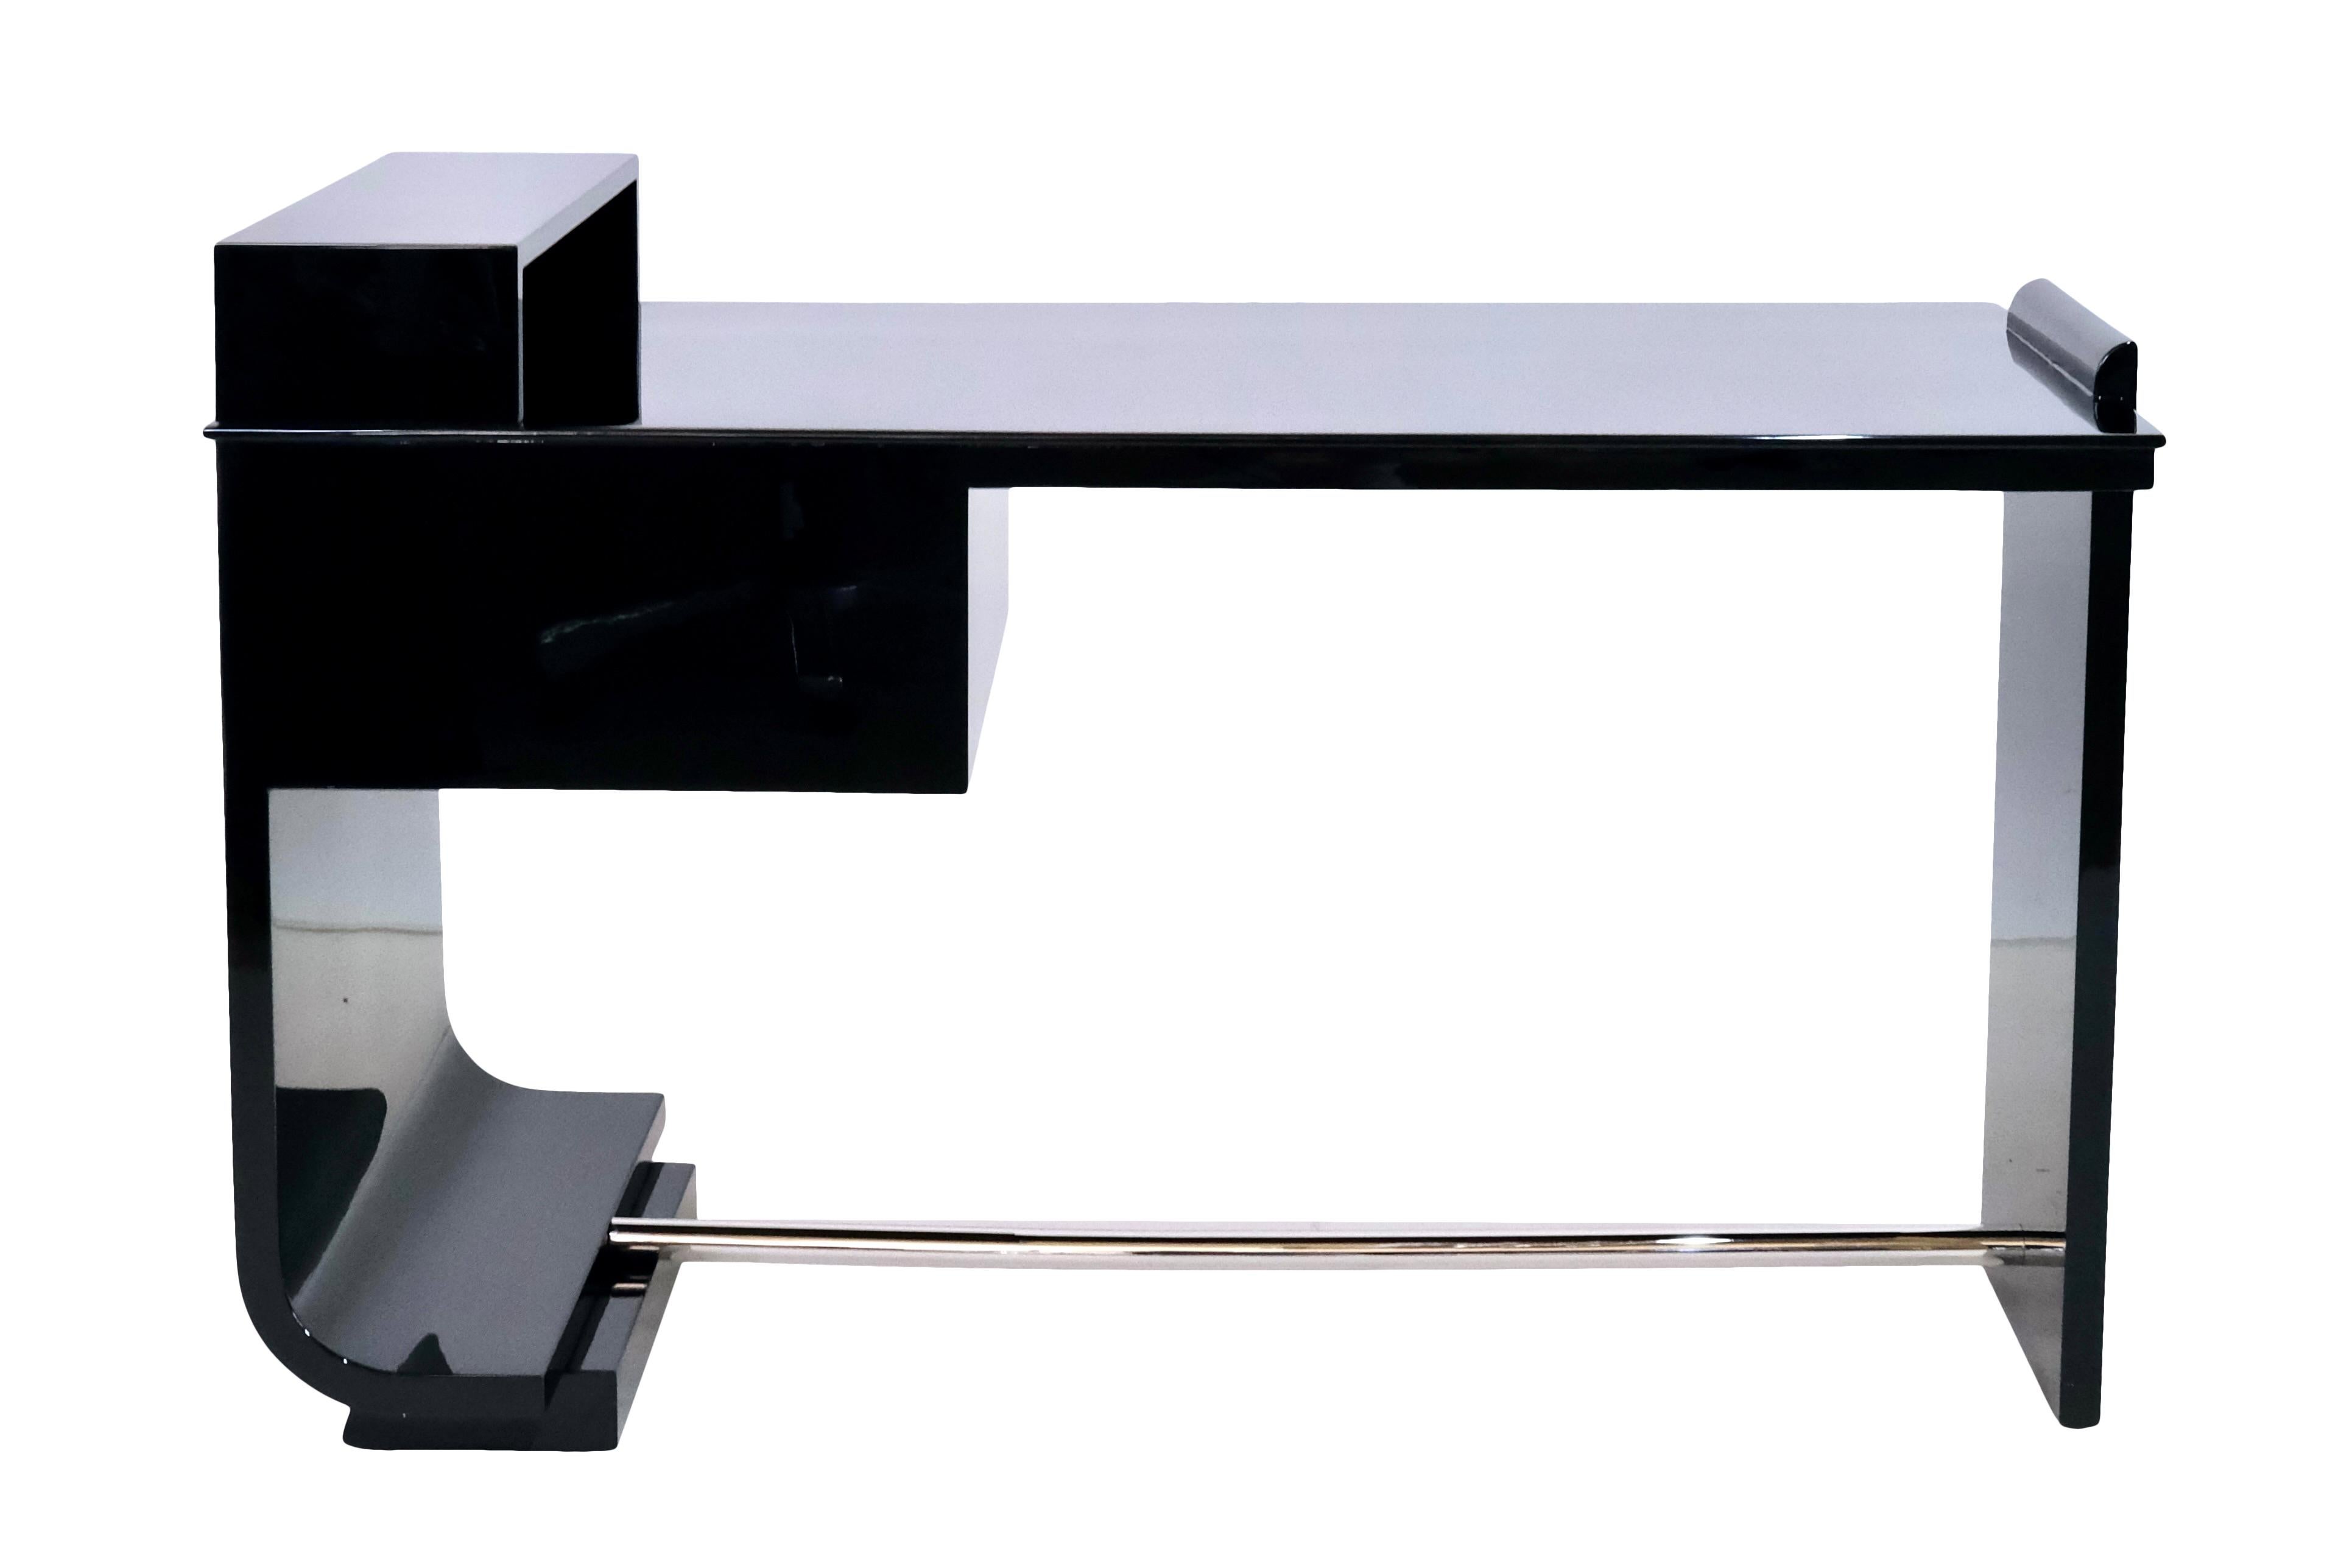 Wood Small Asymmetrical Art Deco Office Desk in Black Lacquer with Nickeled Fittings